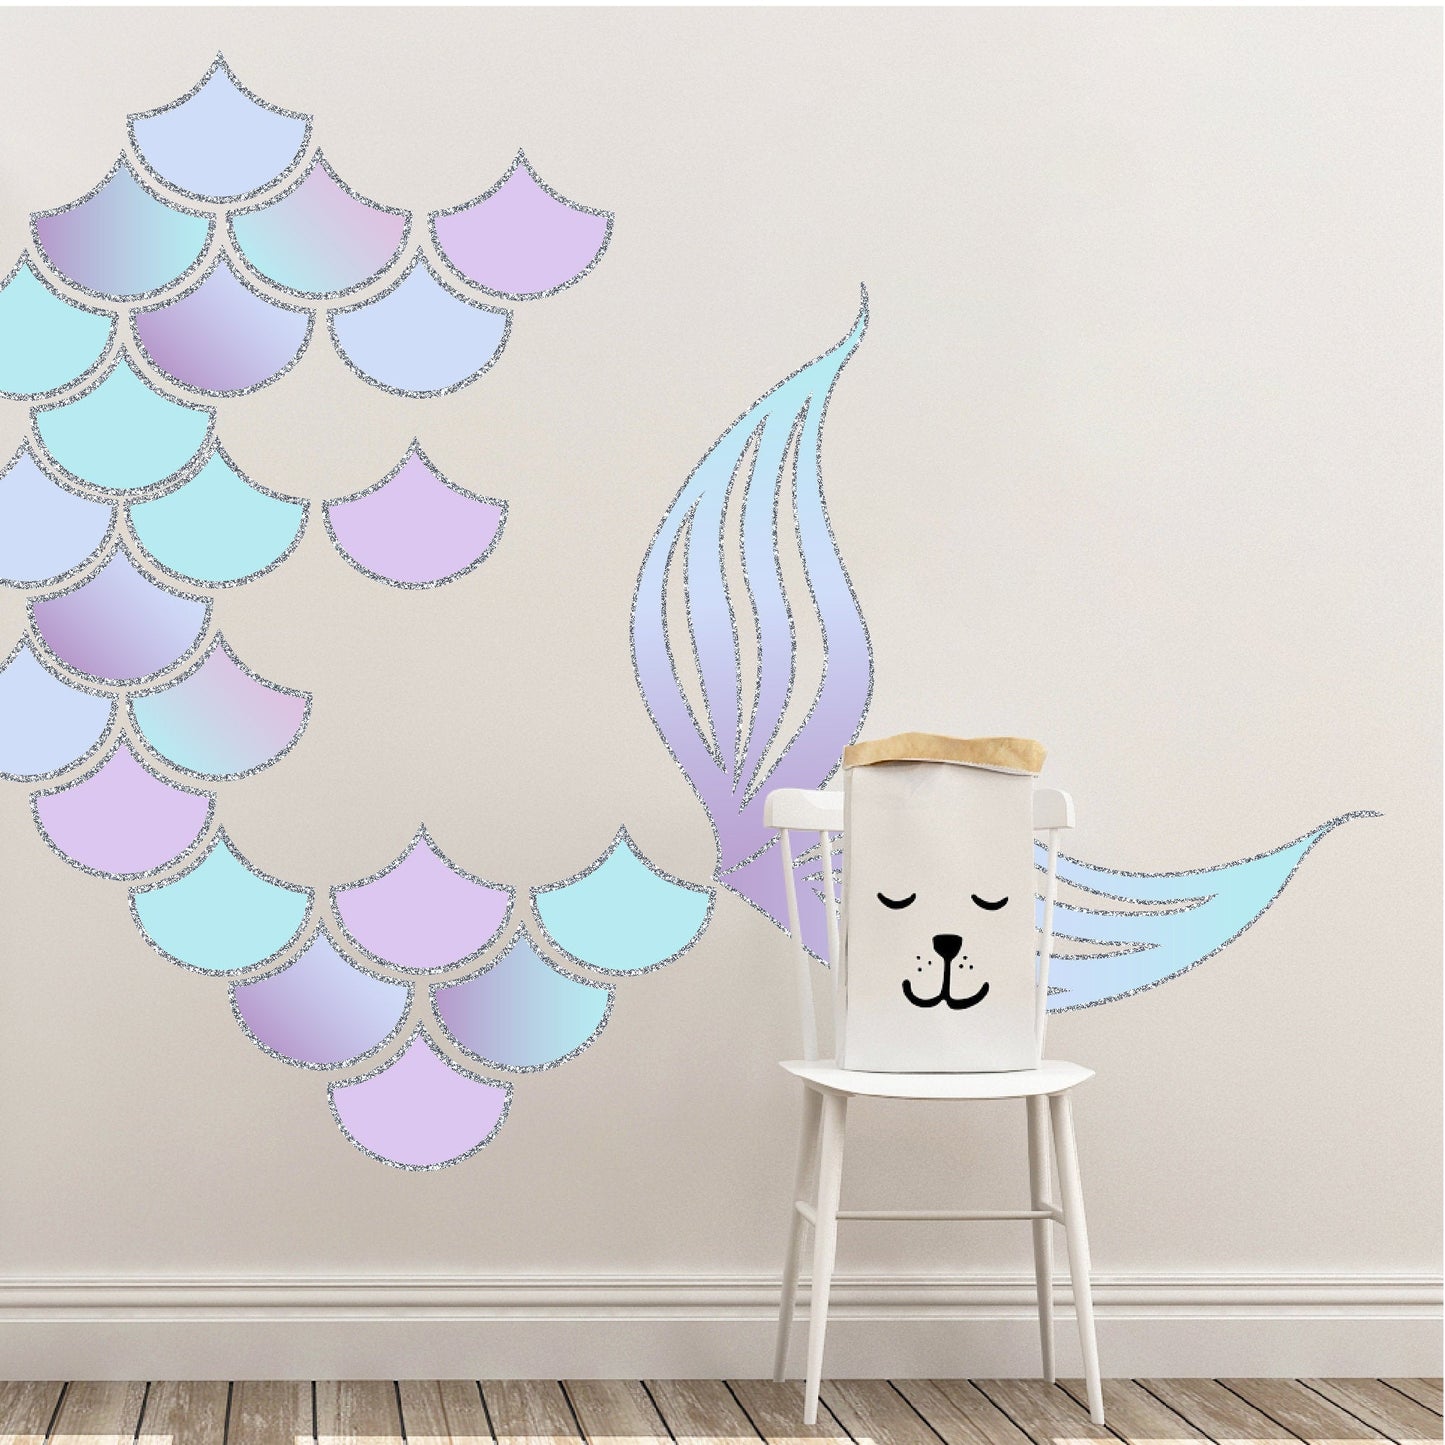 Mermaid Scales and Mermaid Tail Wall Decals | Turquoise & Dark Purple - Picture Perfect Decals